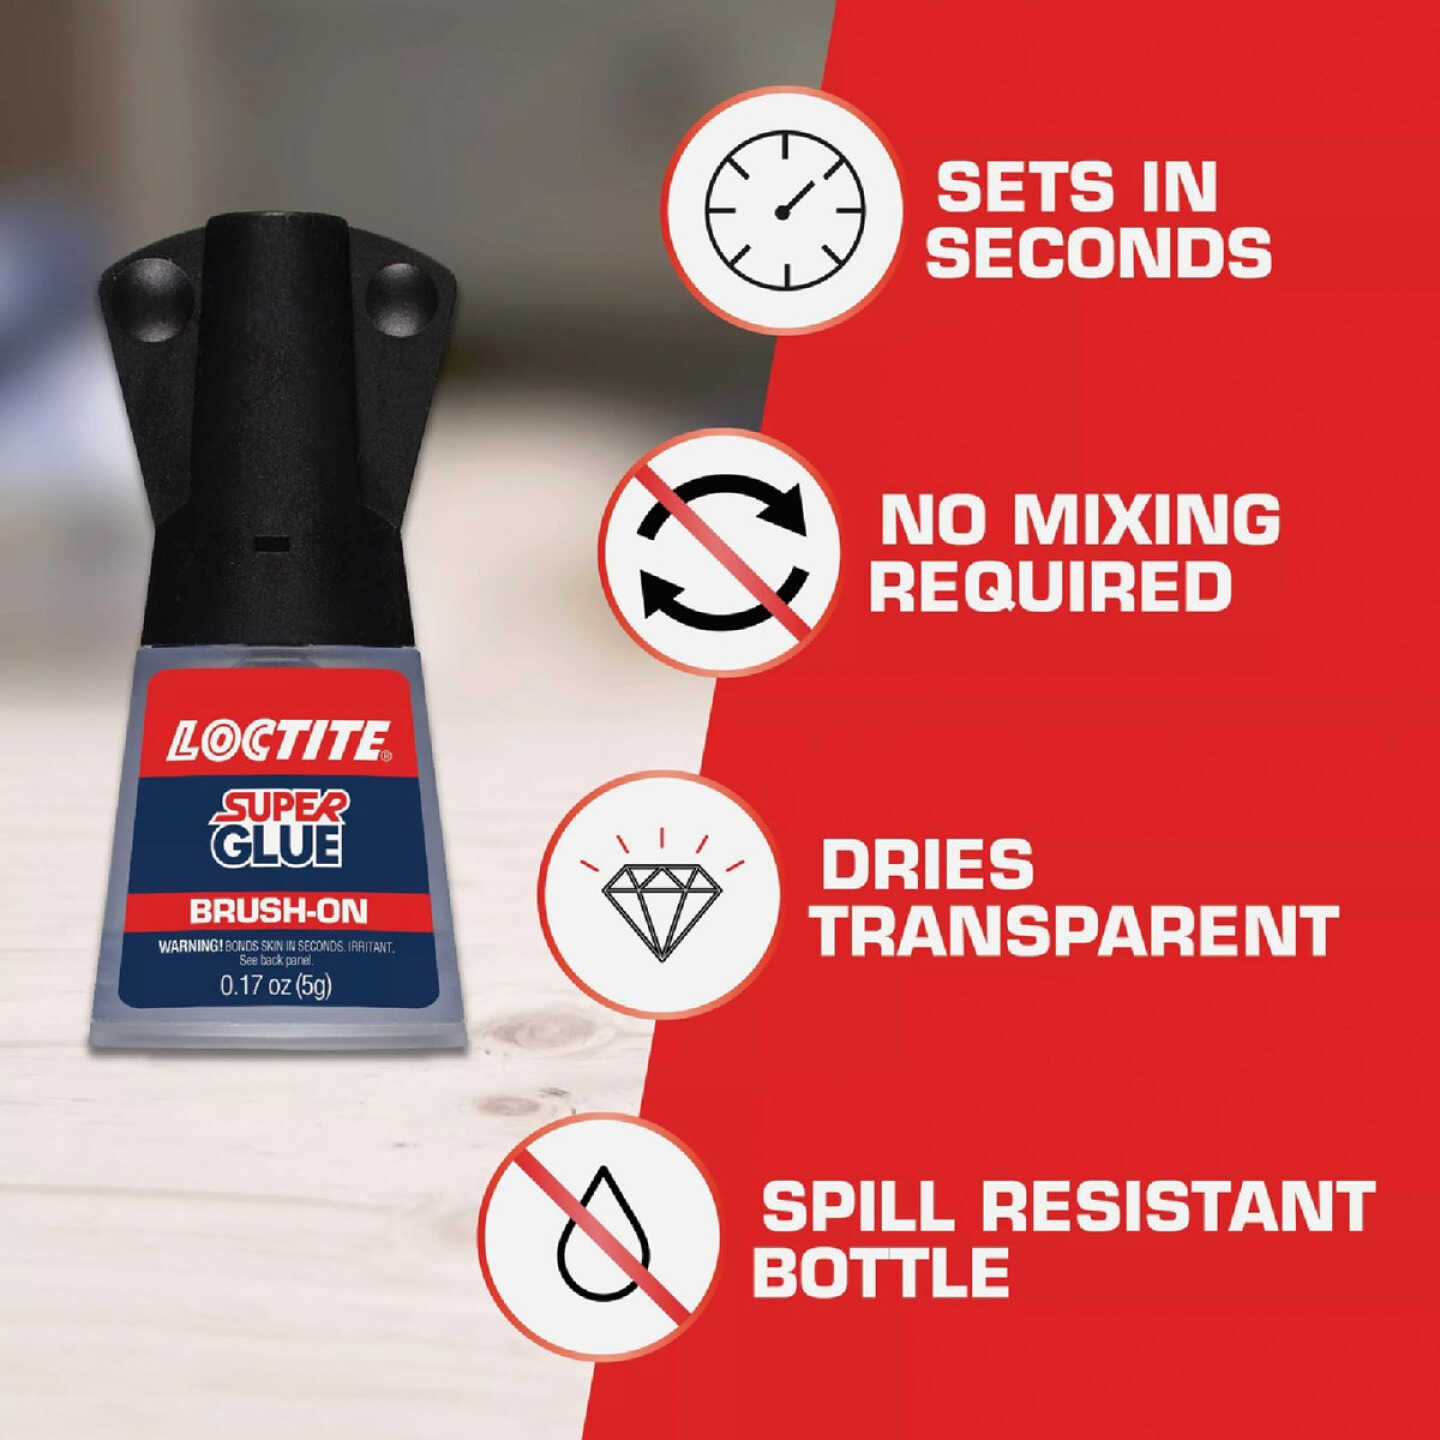 Save on Krazy Glue All-Purpose Precision Tip- 2 ct Order Online